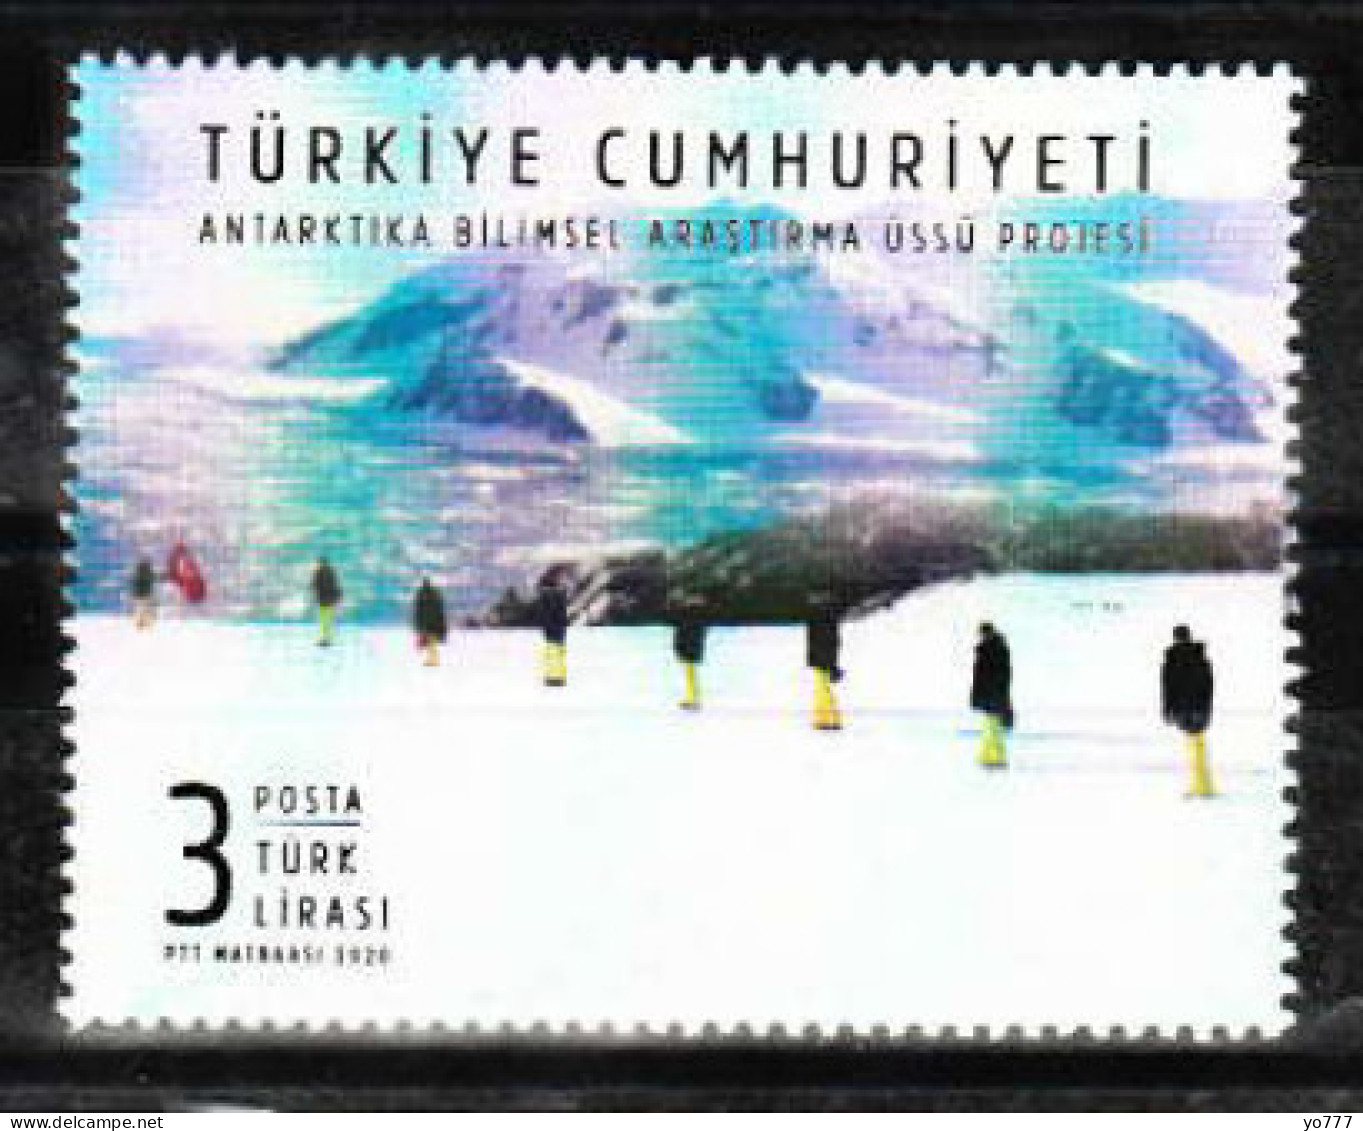 (4545) THE PROJECT OF SCIENTIFIC RESEARCH STATION ANTARCTICA MNH** - Nuovi